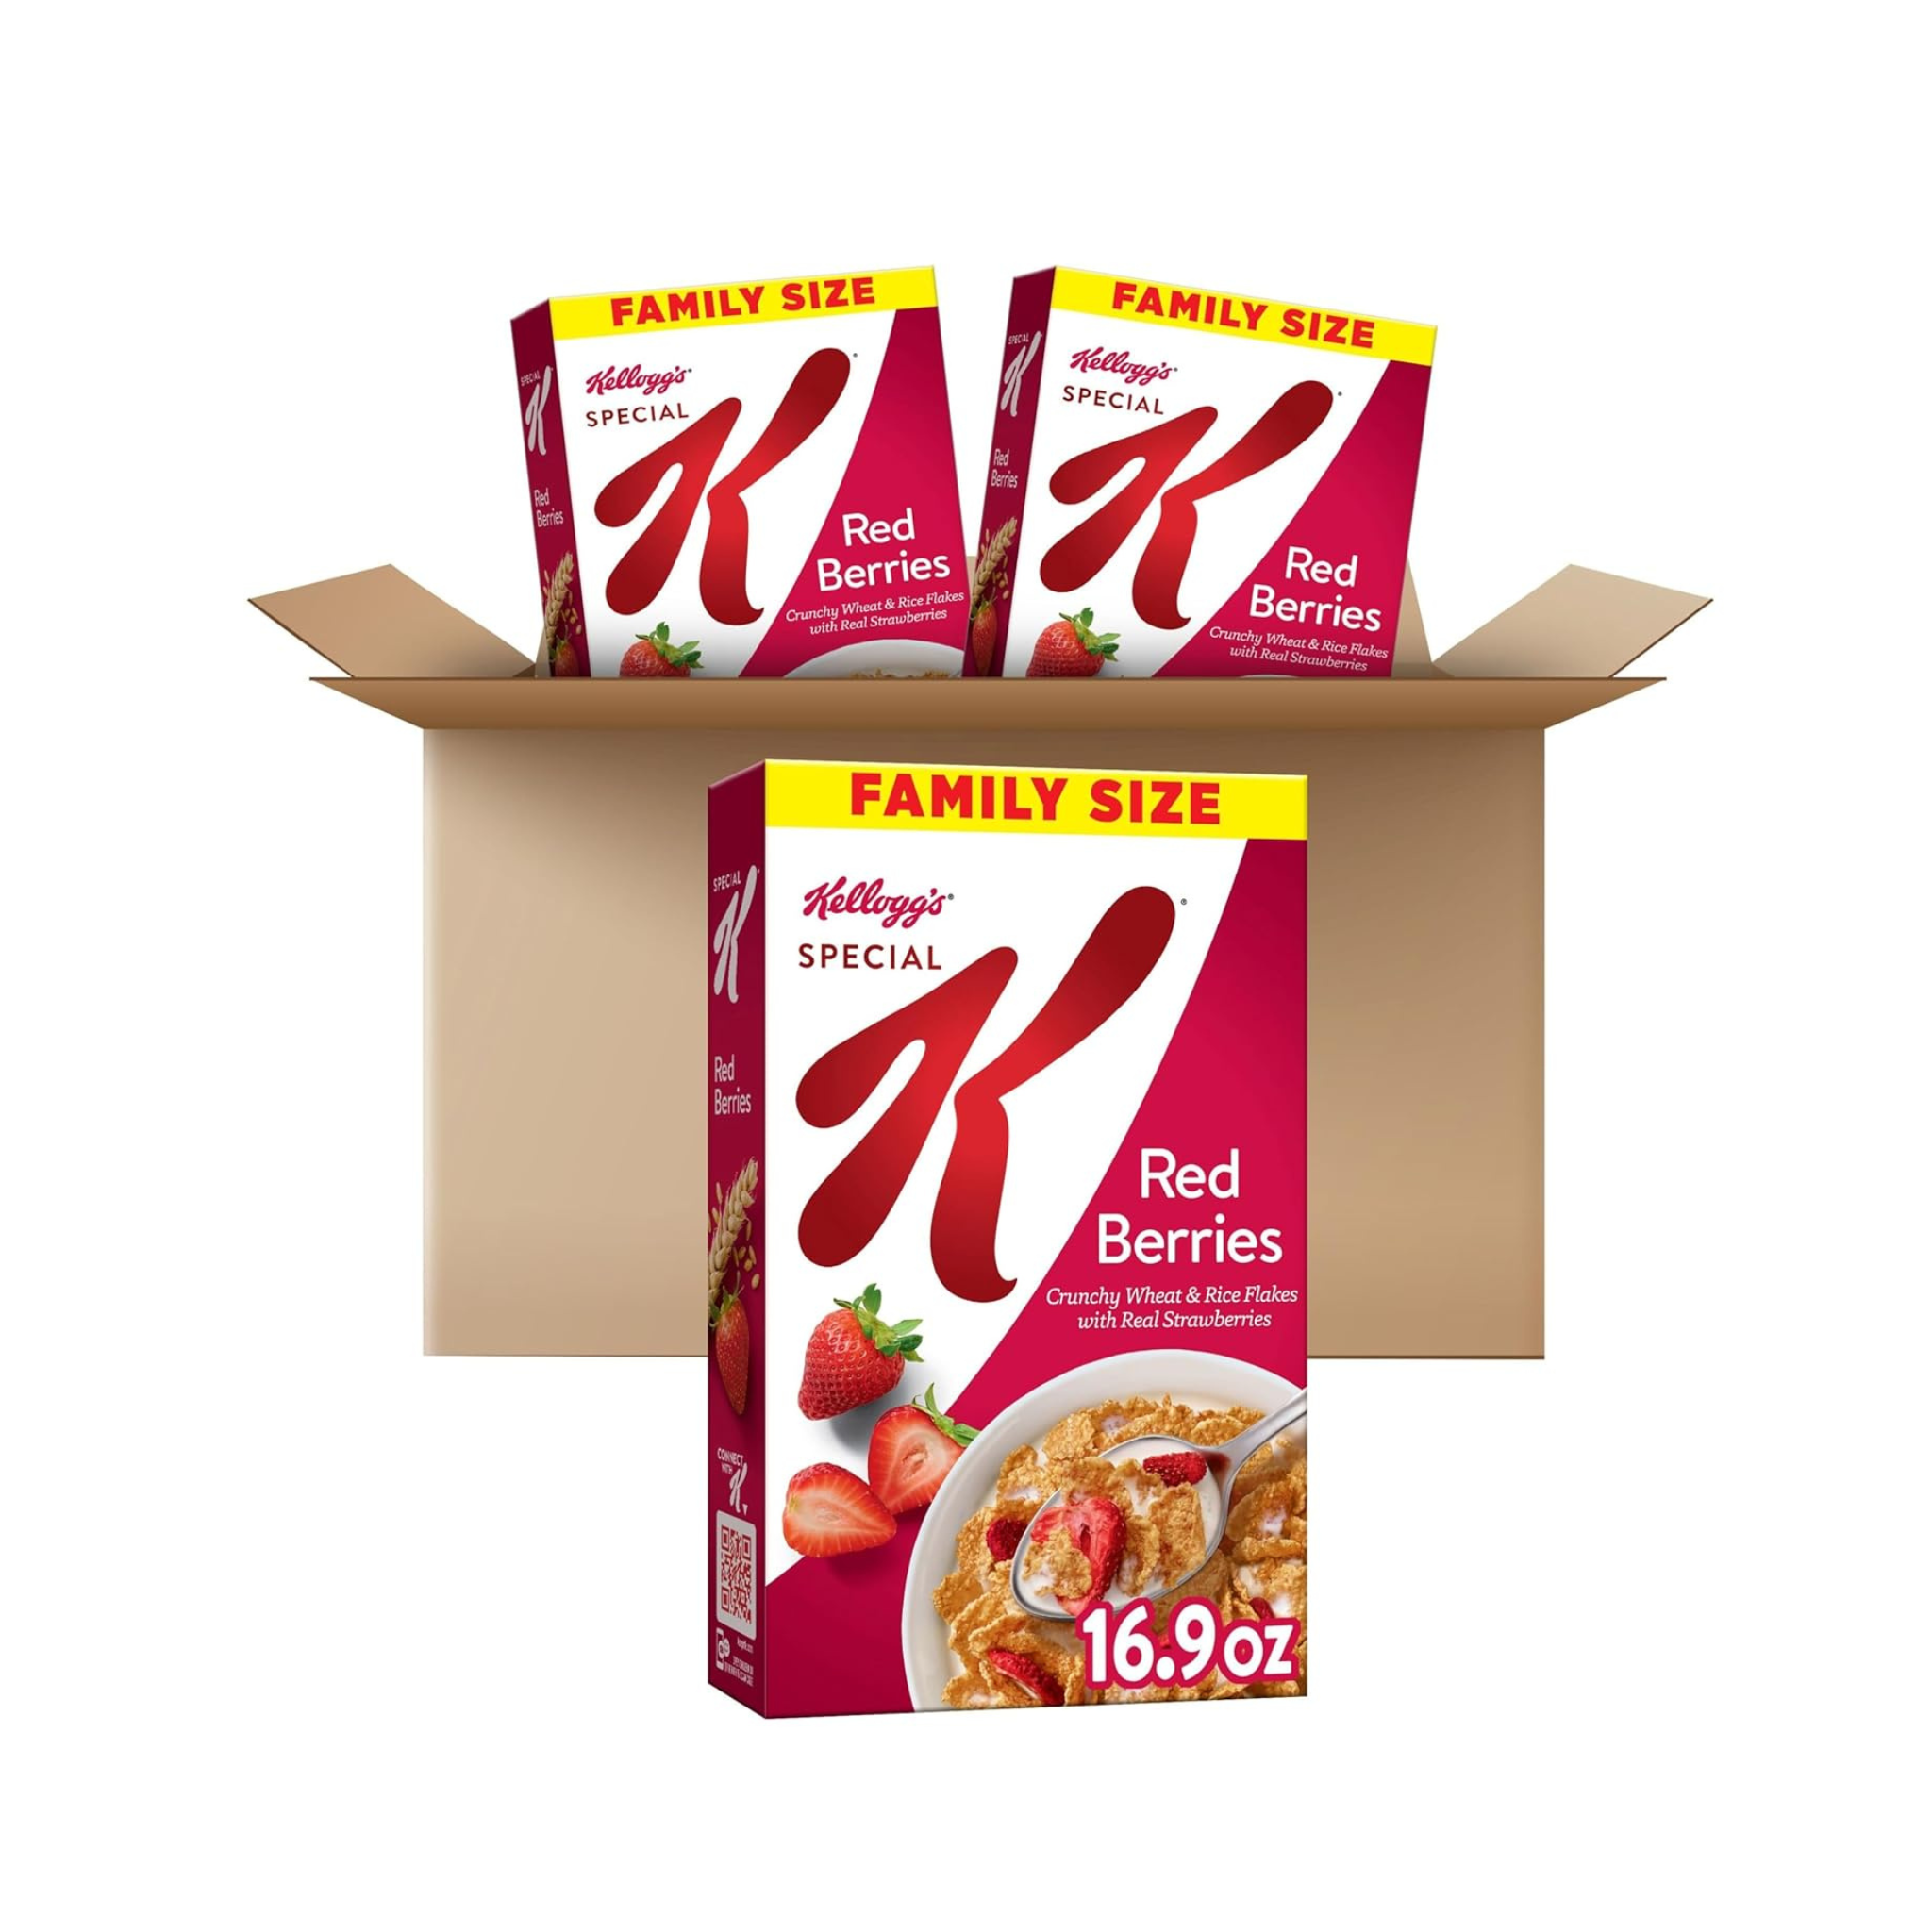 3 Family Sized Boxes of Special K Red Berries Cereal